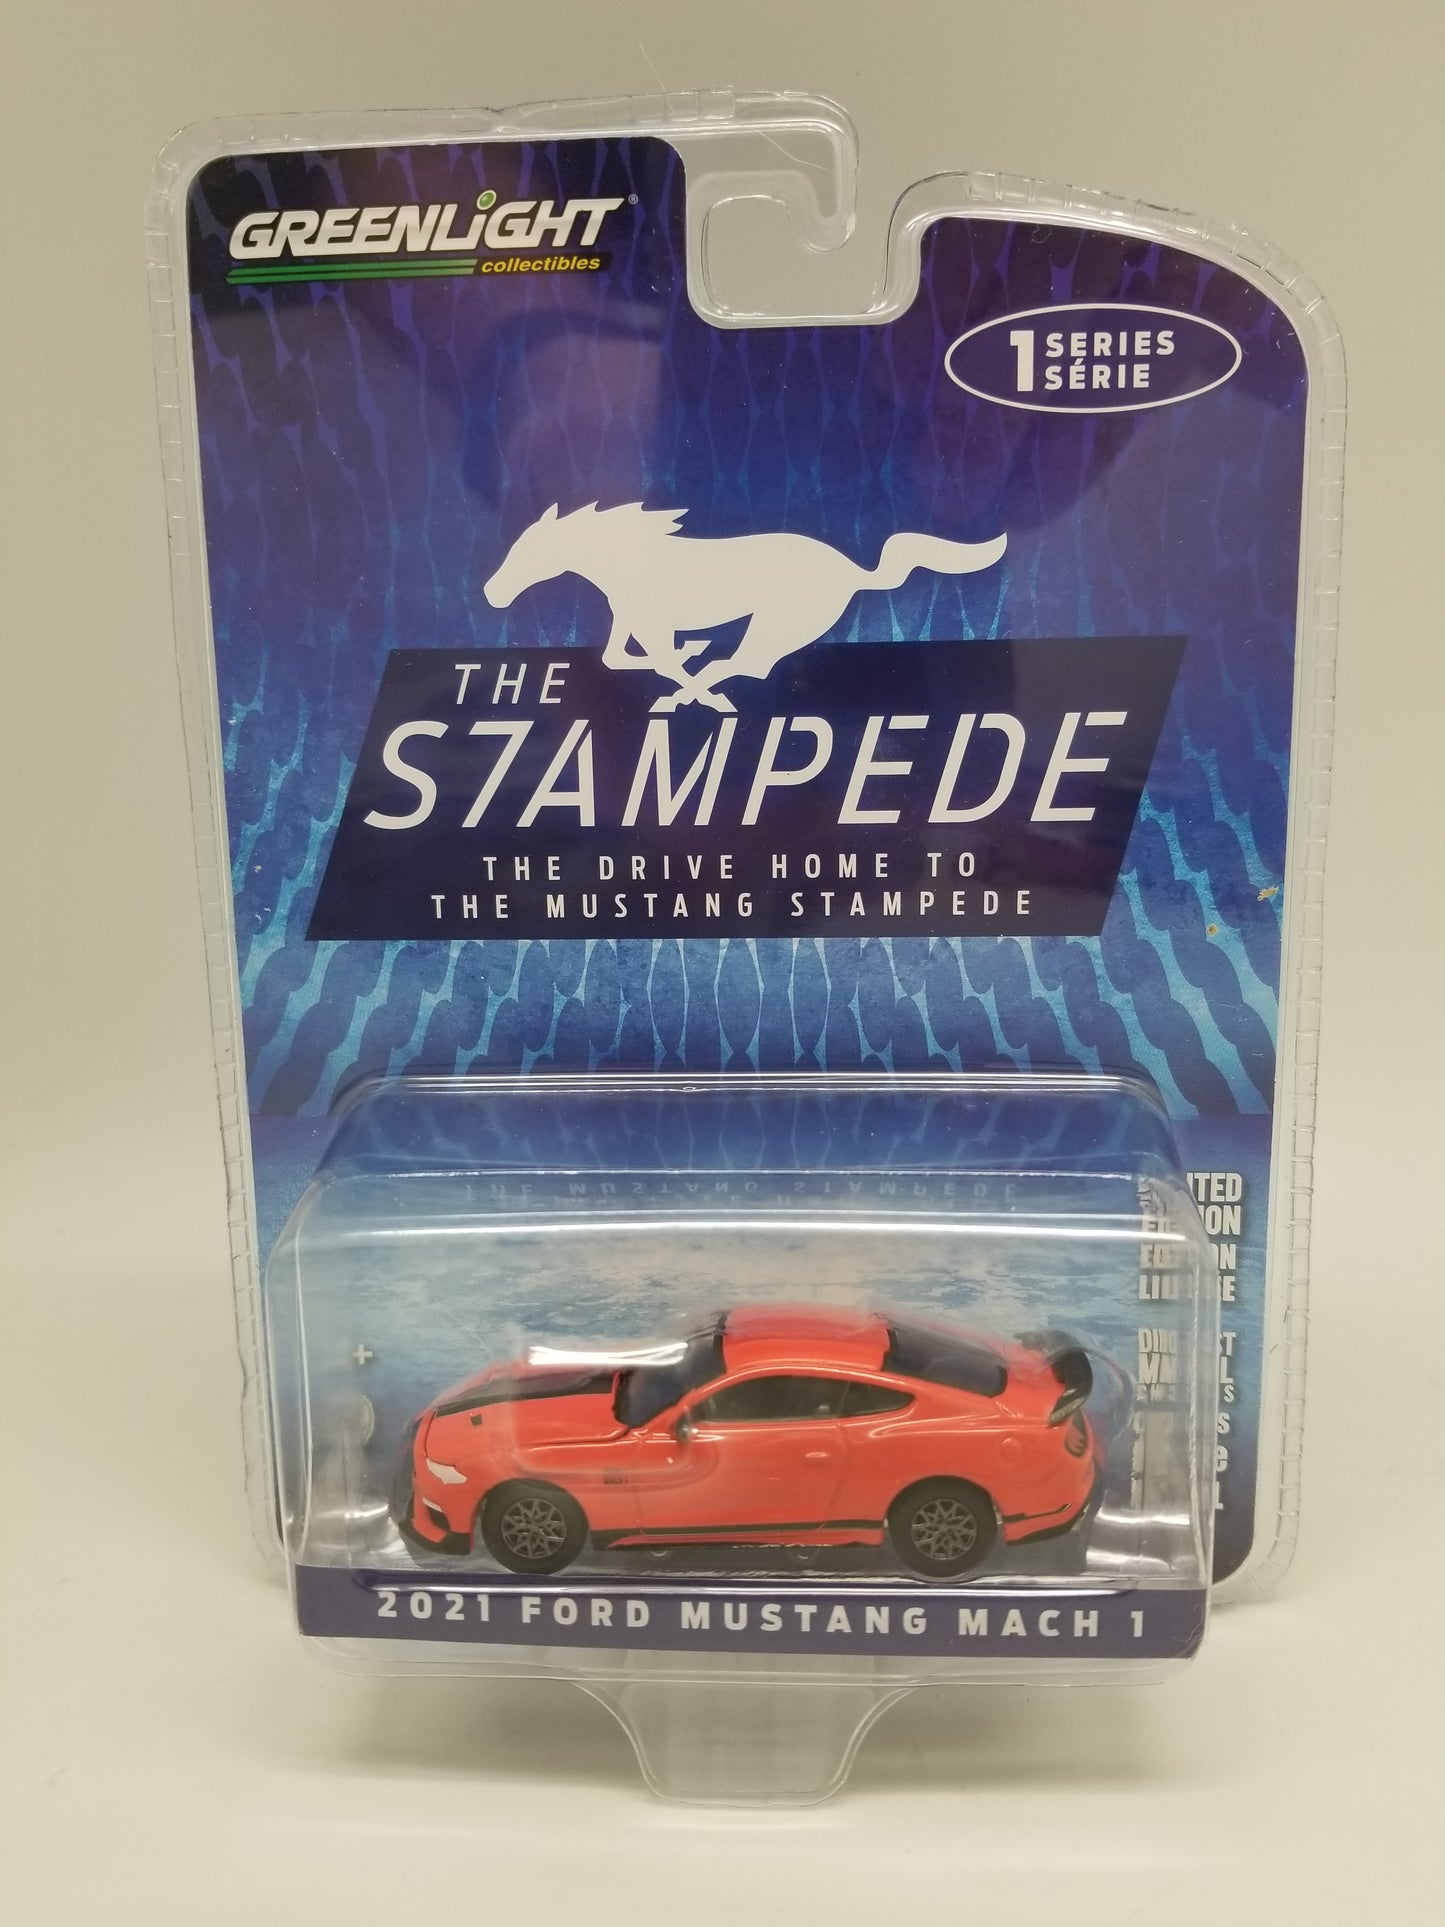 GL - 2021 Ford Mustang Mach 1 - The Stampede